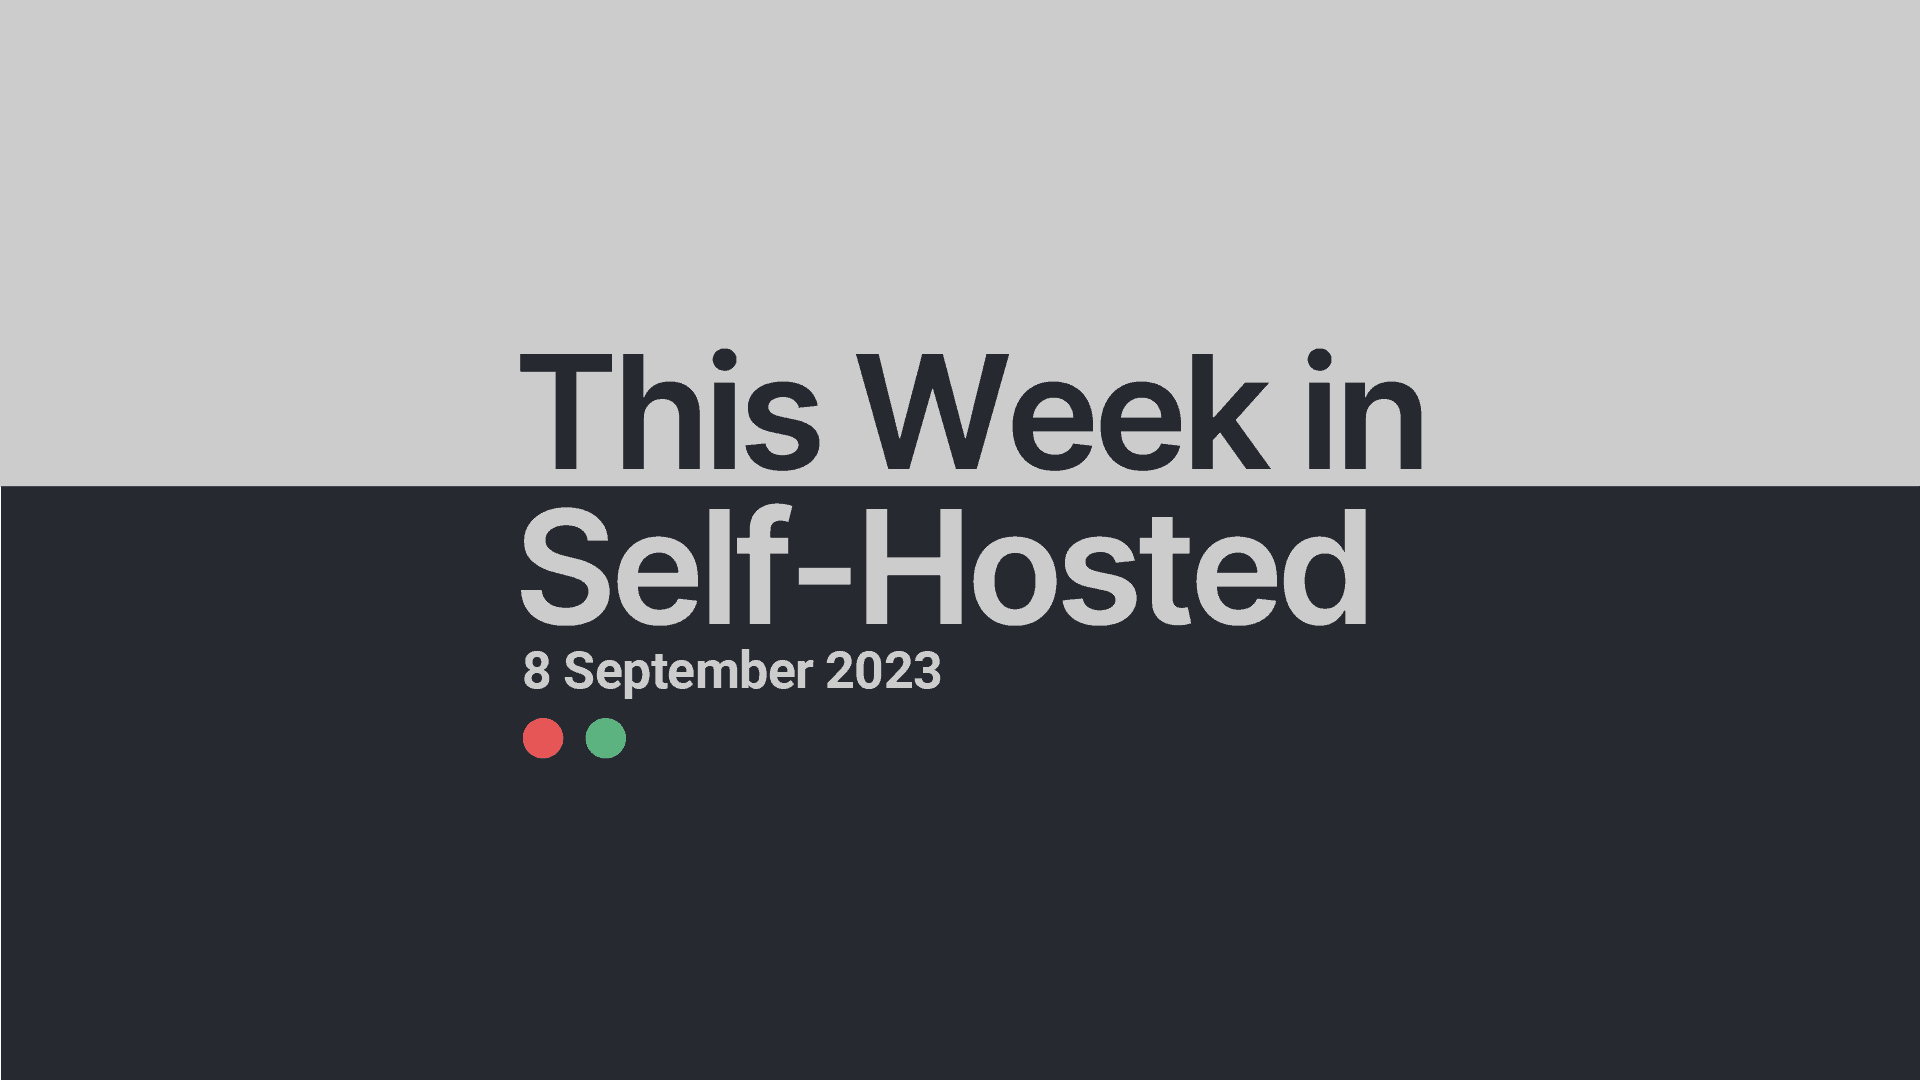 This Week in Self-Hosted (8 September 2023) Post image